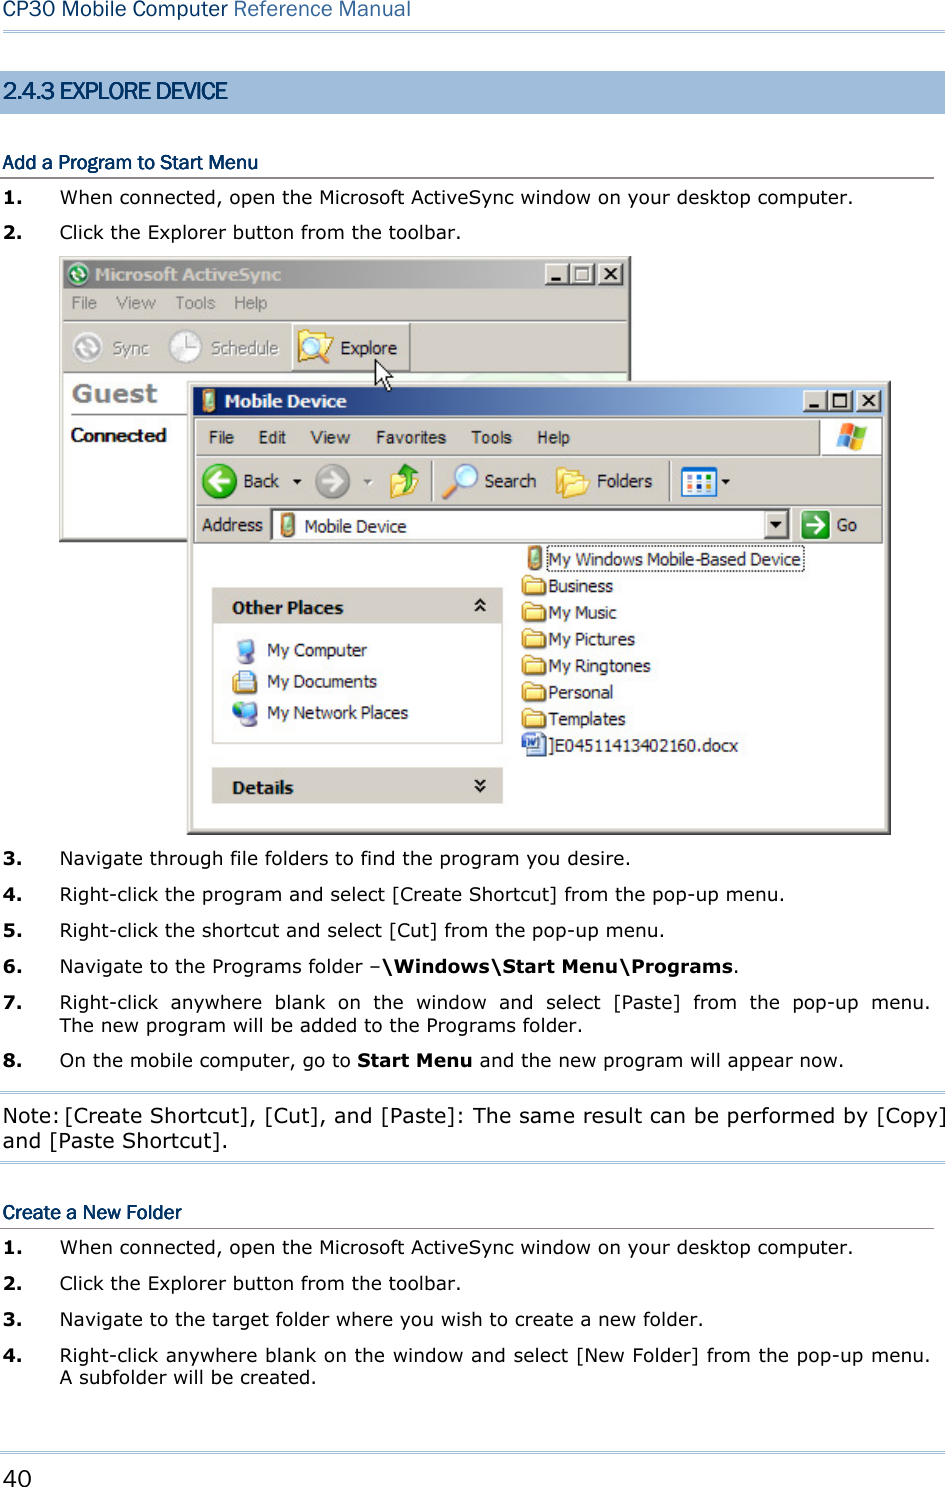 40  CP30 Mobile Computer Reference Manual  2.2.2.2.4444....3333    EXPLORE DEVICEEXPLORE DEVICEEXPLORE DEVICEEXPLORE DEVICE    Add a Program to Start MenuAdd a Program to Start MenuAdd a Program to Start MenuAdd a Program to Start Menu    1.  When connected, open the Microsoft ActiveSync window on your desktop computer. 2.  Click the Explorer button from the toolbar.  3.  Navigate through file folders to find the program you desire. 4.  Right-click the program and select [Create Shortcut] from the pop-up menu. 5.  Right-click the shortcut and select [Cut] from the pop-up menu. 6.  Navigate to the Programs folder –\Windows\Start Menu\Programs. 7.  Right-click  anywhere  blank  on  the  window  and  select  [Paste]  from  the  pop-up  menu.             The new program will be added to the Programs folder. 8.  On the mobile computer, go to Start Menu and the new program will appear now. Note: [Create Shortcut], [Cut], and [Paste]: The same result can be performed by [Copy] and [Paste Shortcut]. Create a New FolderCreate a New FolderCreate a New FolderCreate a New Folder    1.  When connected, open the Microsoft ActiveSync window on your desktop computer. 2.  Click the Explorer button from the toolbar. 3.  Navigate to the target folder where you wish to create a new folder. 4.  Right-click anywhere blank on the window and select [New Folder] from the pop-up menu. A subfolder will be created.  